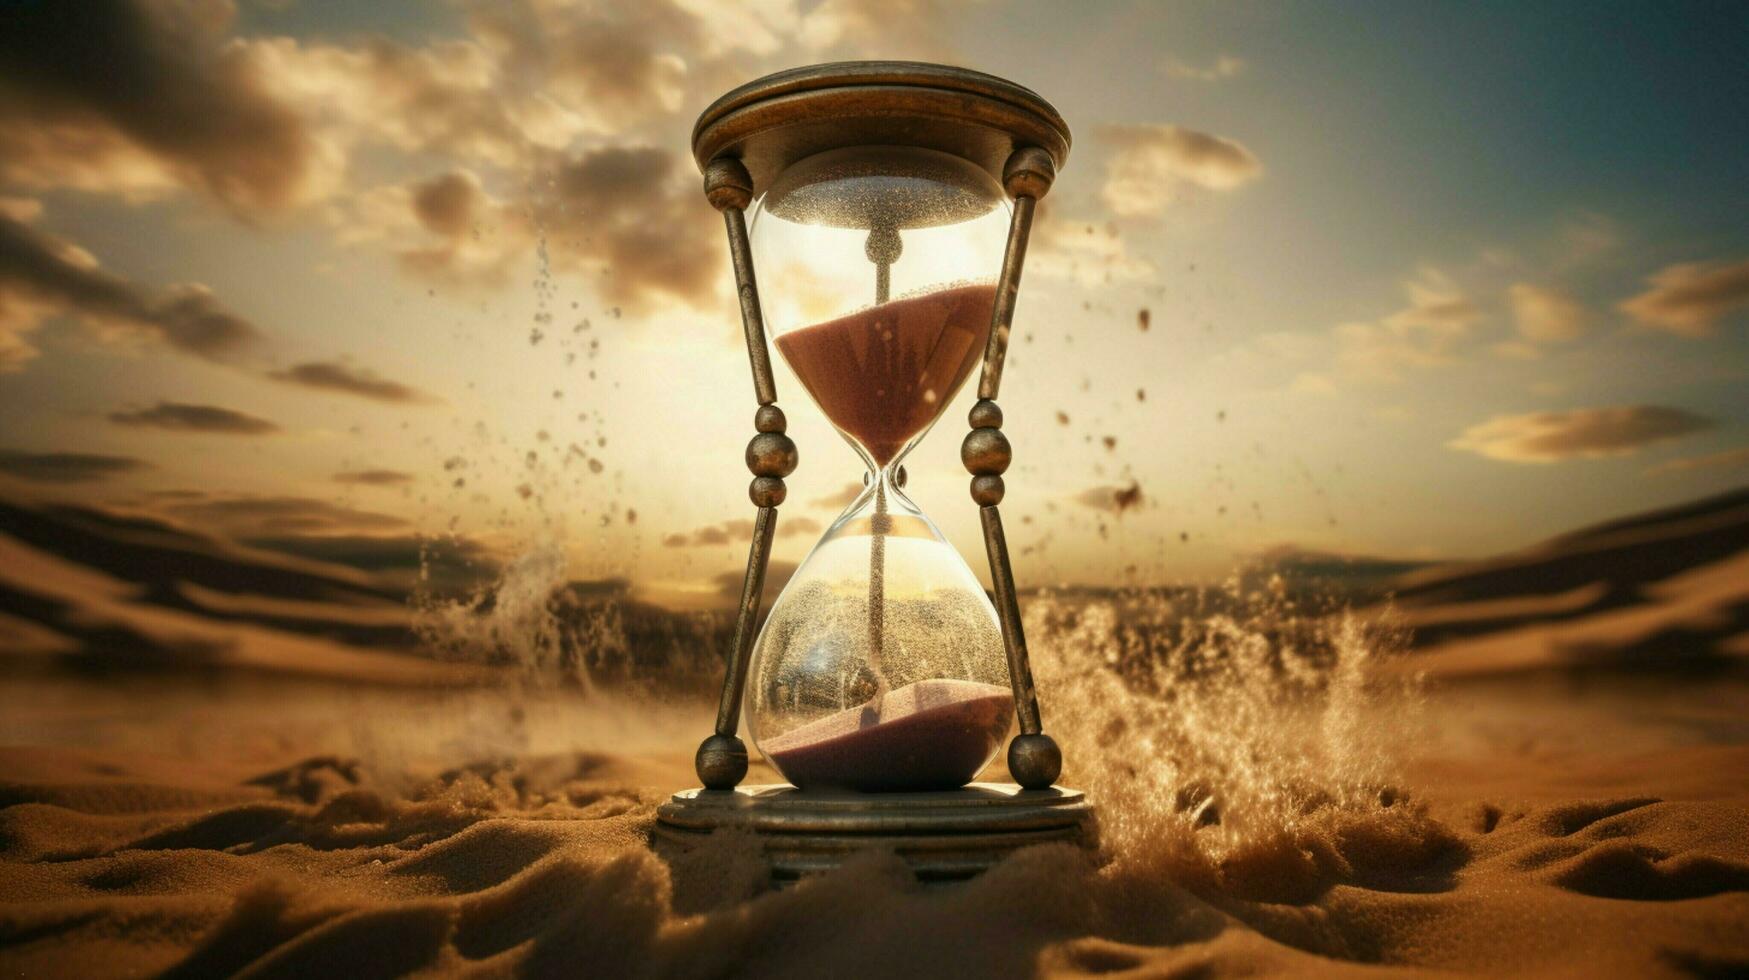 time flows like sand in an hourglass photo